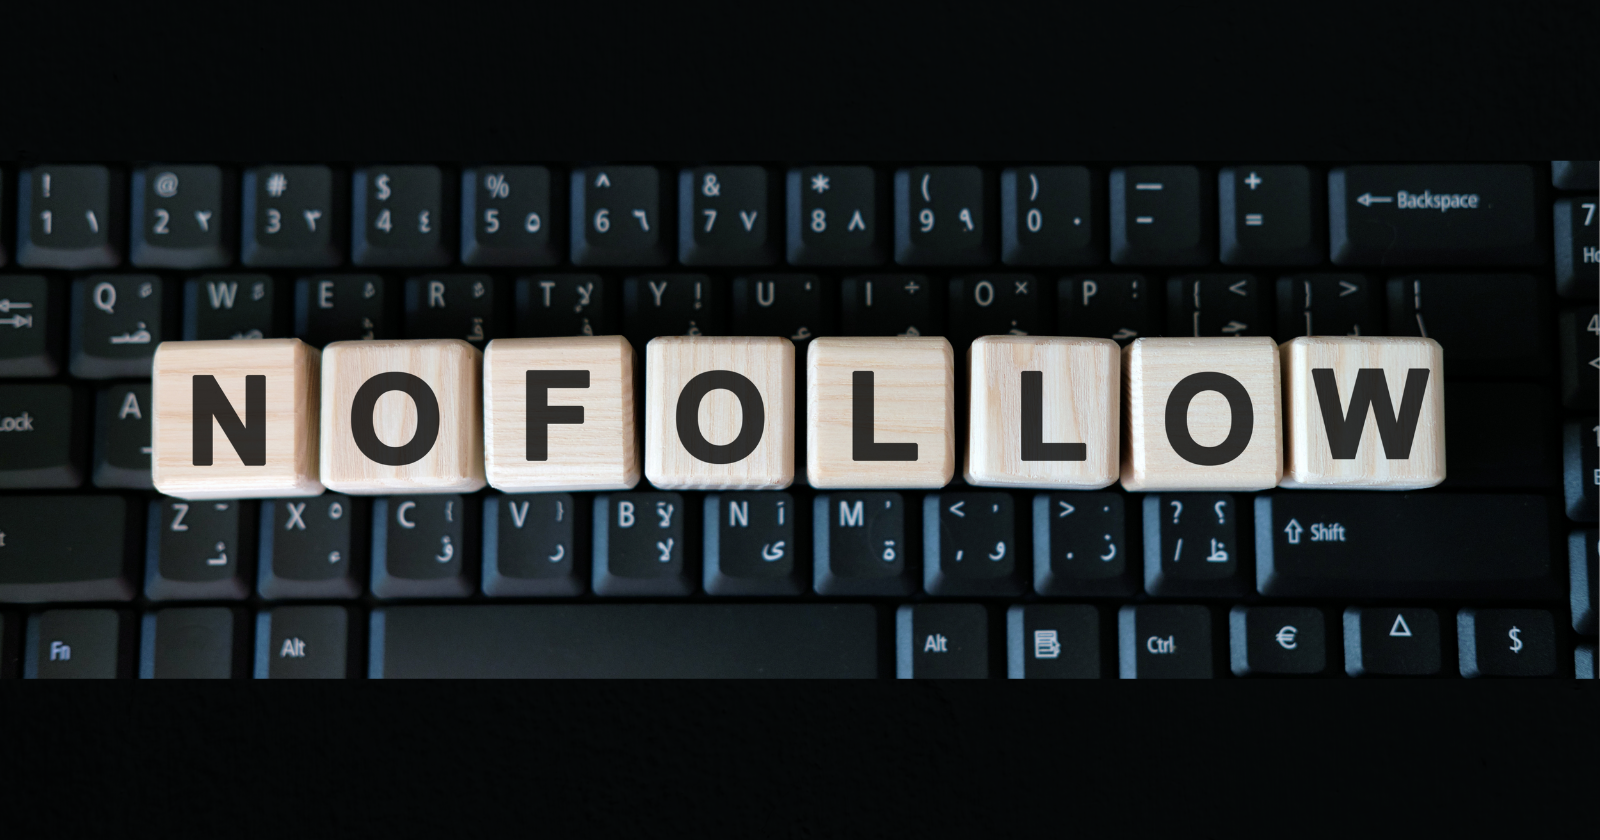 Why did search engines create the nofollow tag?